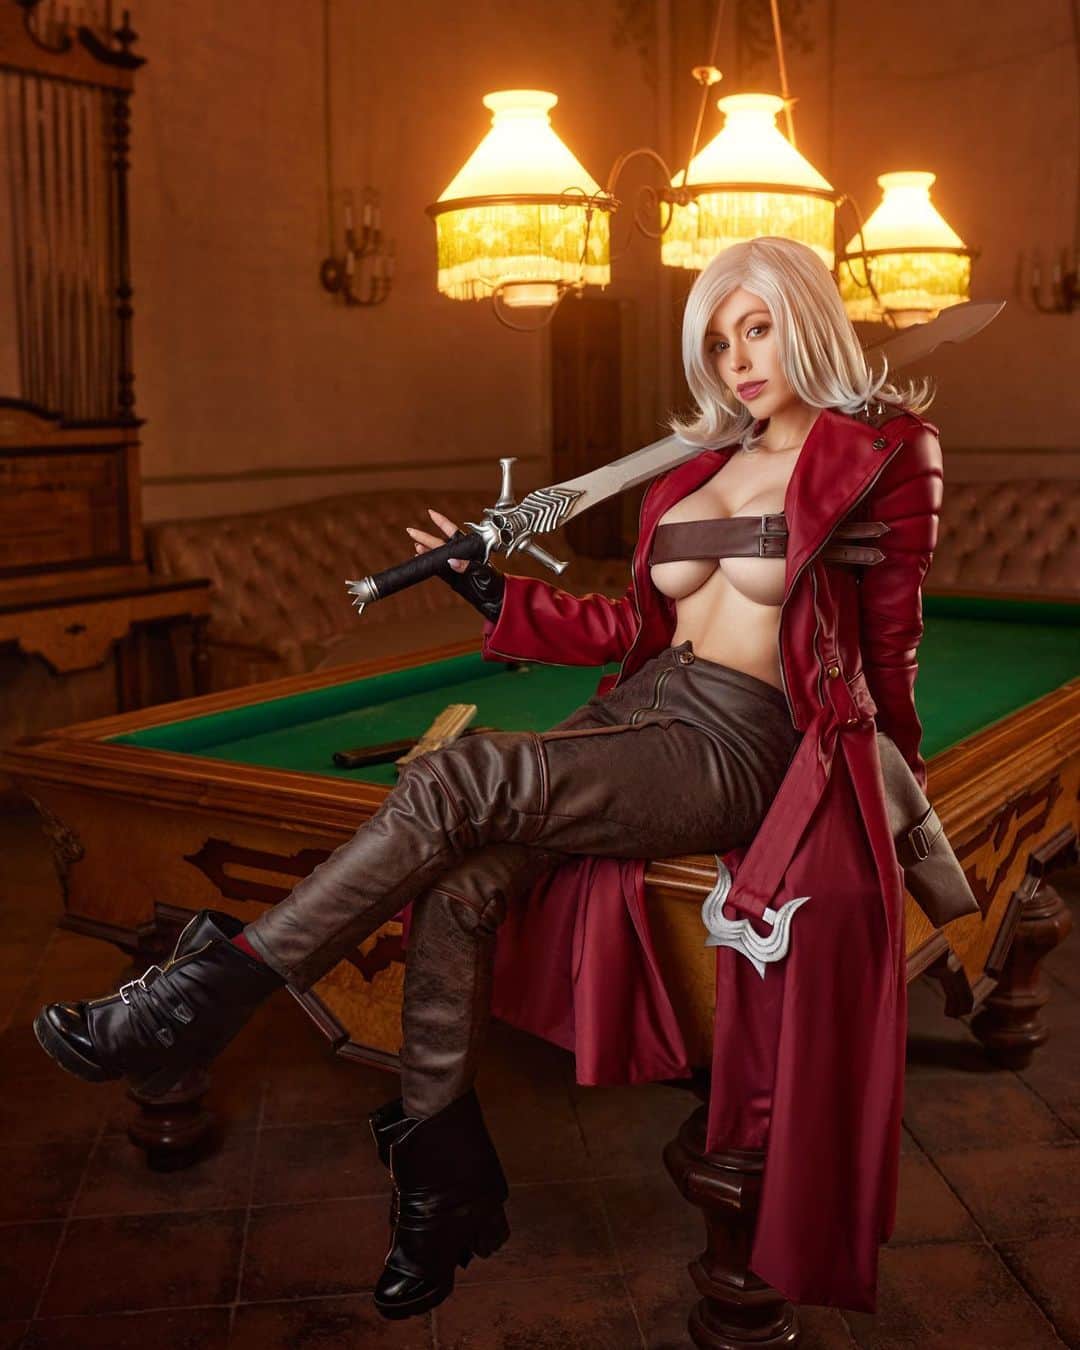 Nadya Antonのインスタグラム：「Nadya Sparda - Devil May Cry 3 🔥 Be whoever you want to be, life is too short! First photos of Dante in the palace of Villa Mirra, residence back then to Napoleon Bonaparte, crazy to think that now we can take photos of cosplay there 🔥🔥🔥 📸 @azproductioncosp  👗 @nadyasonika  #dante #devilmaycry #capcom #genderbender」